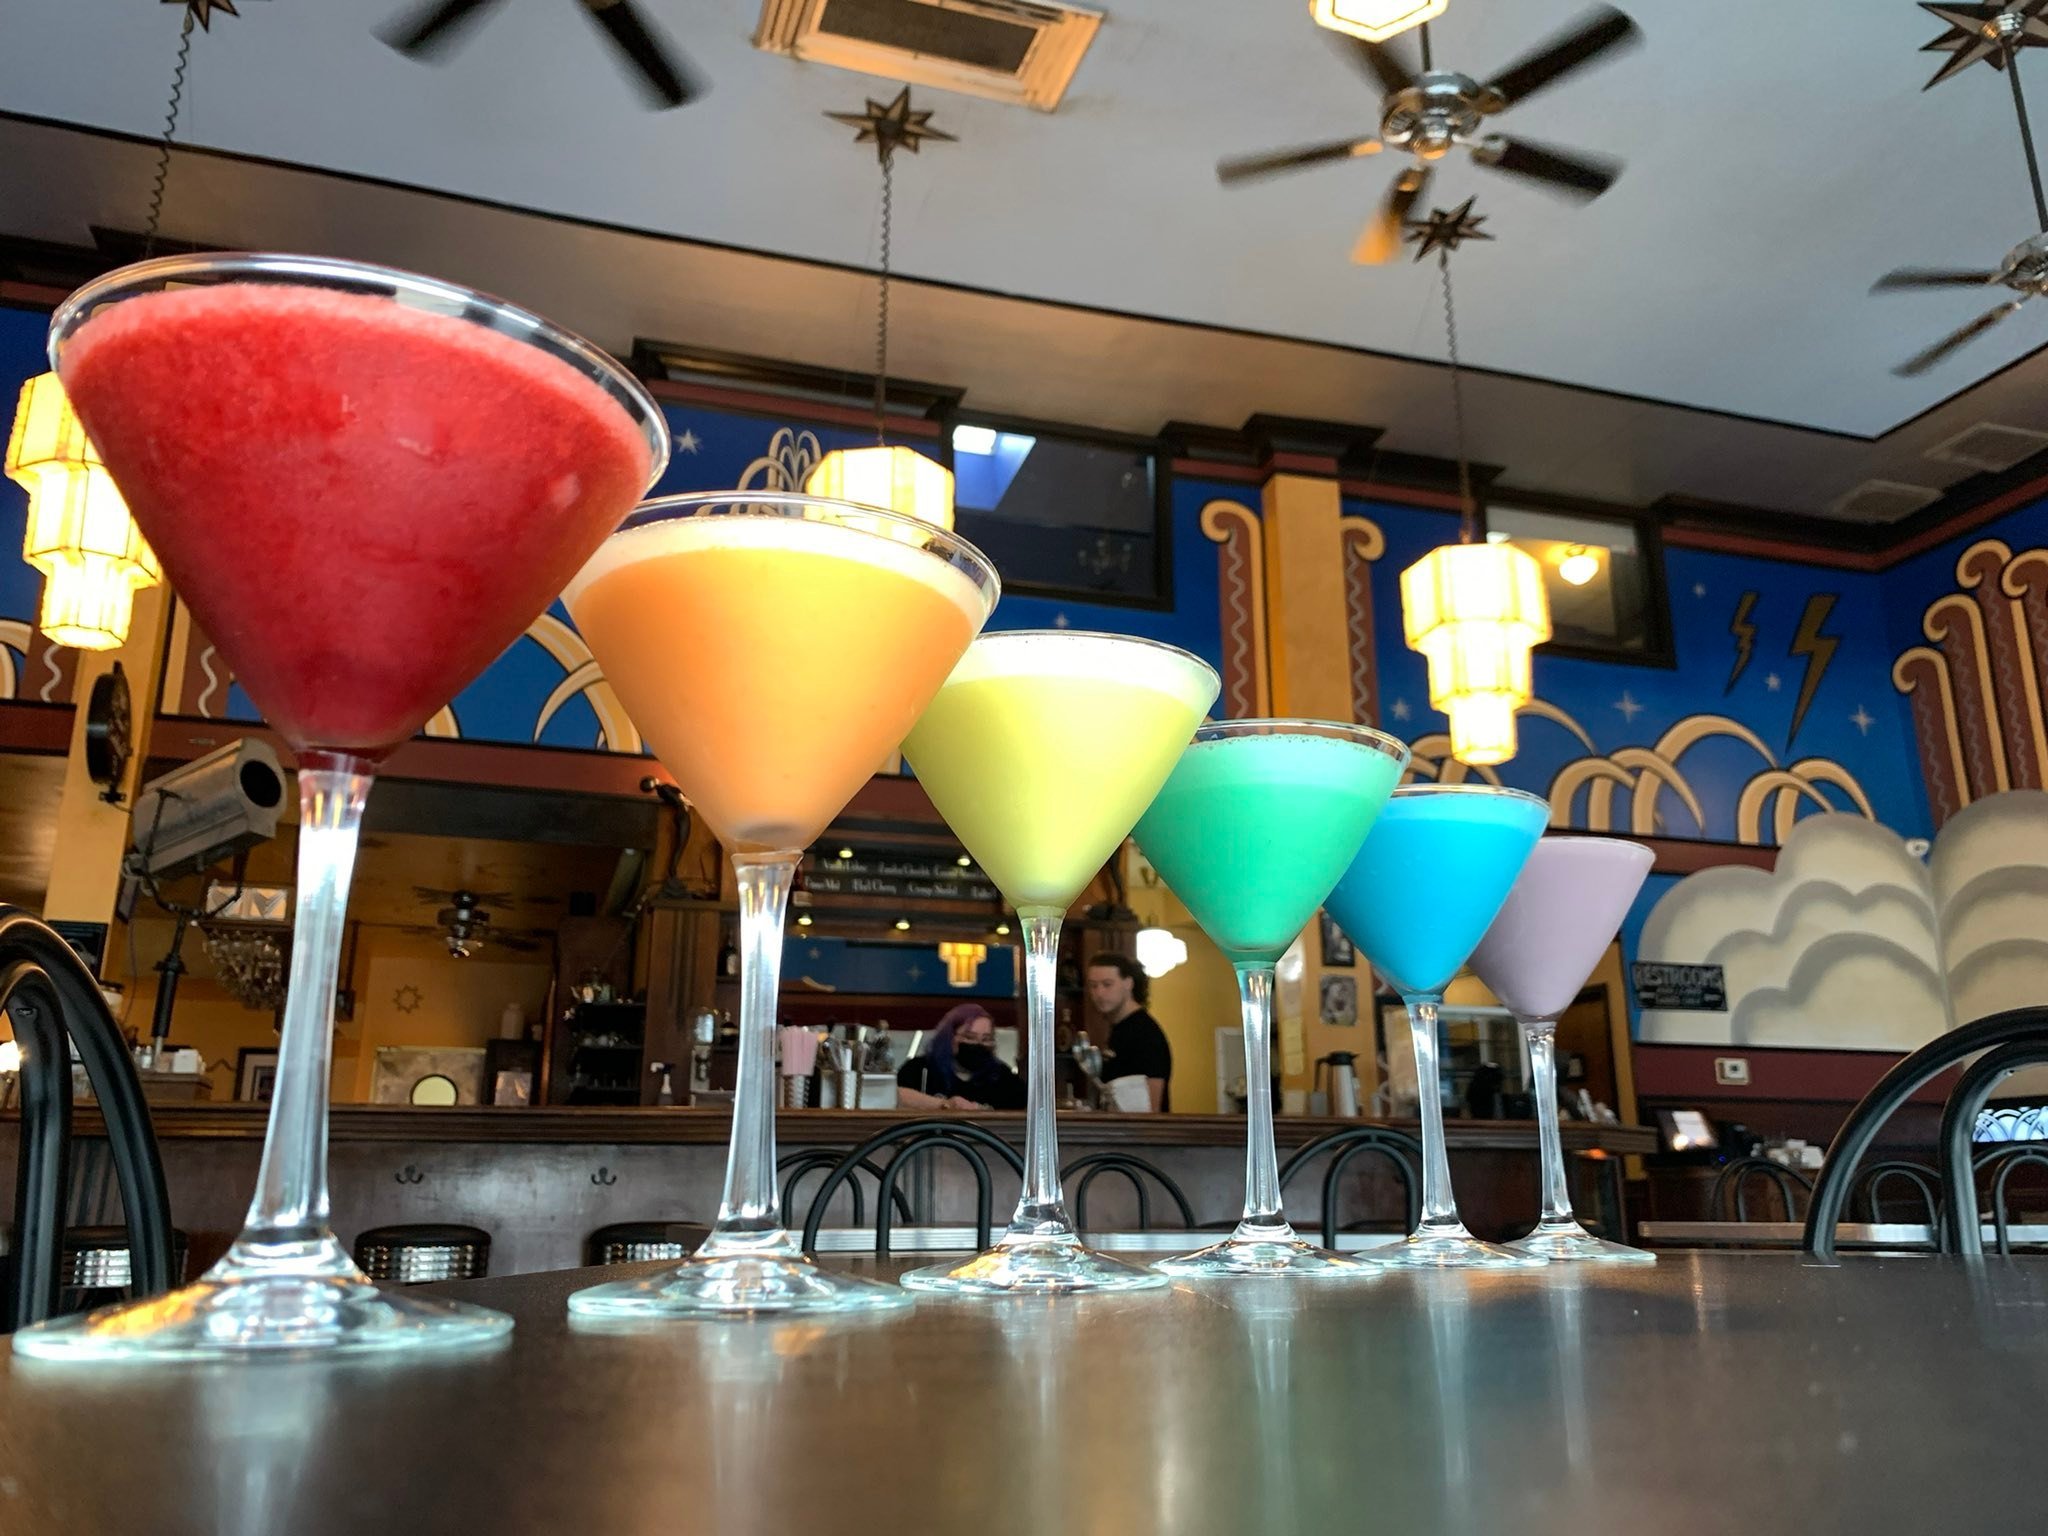 Eat and Drink at The Fountain on Locust to support Circus Harmony